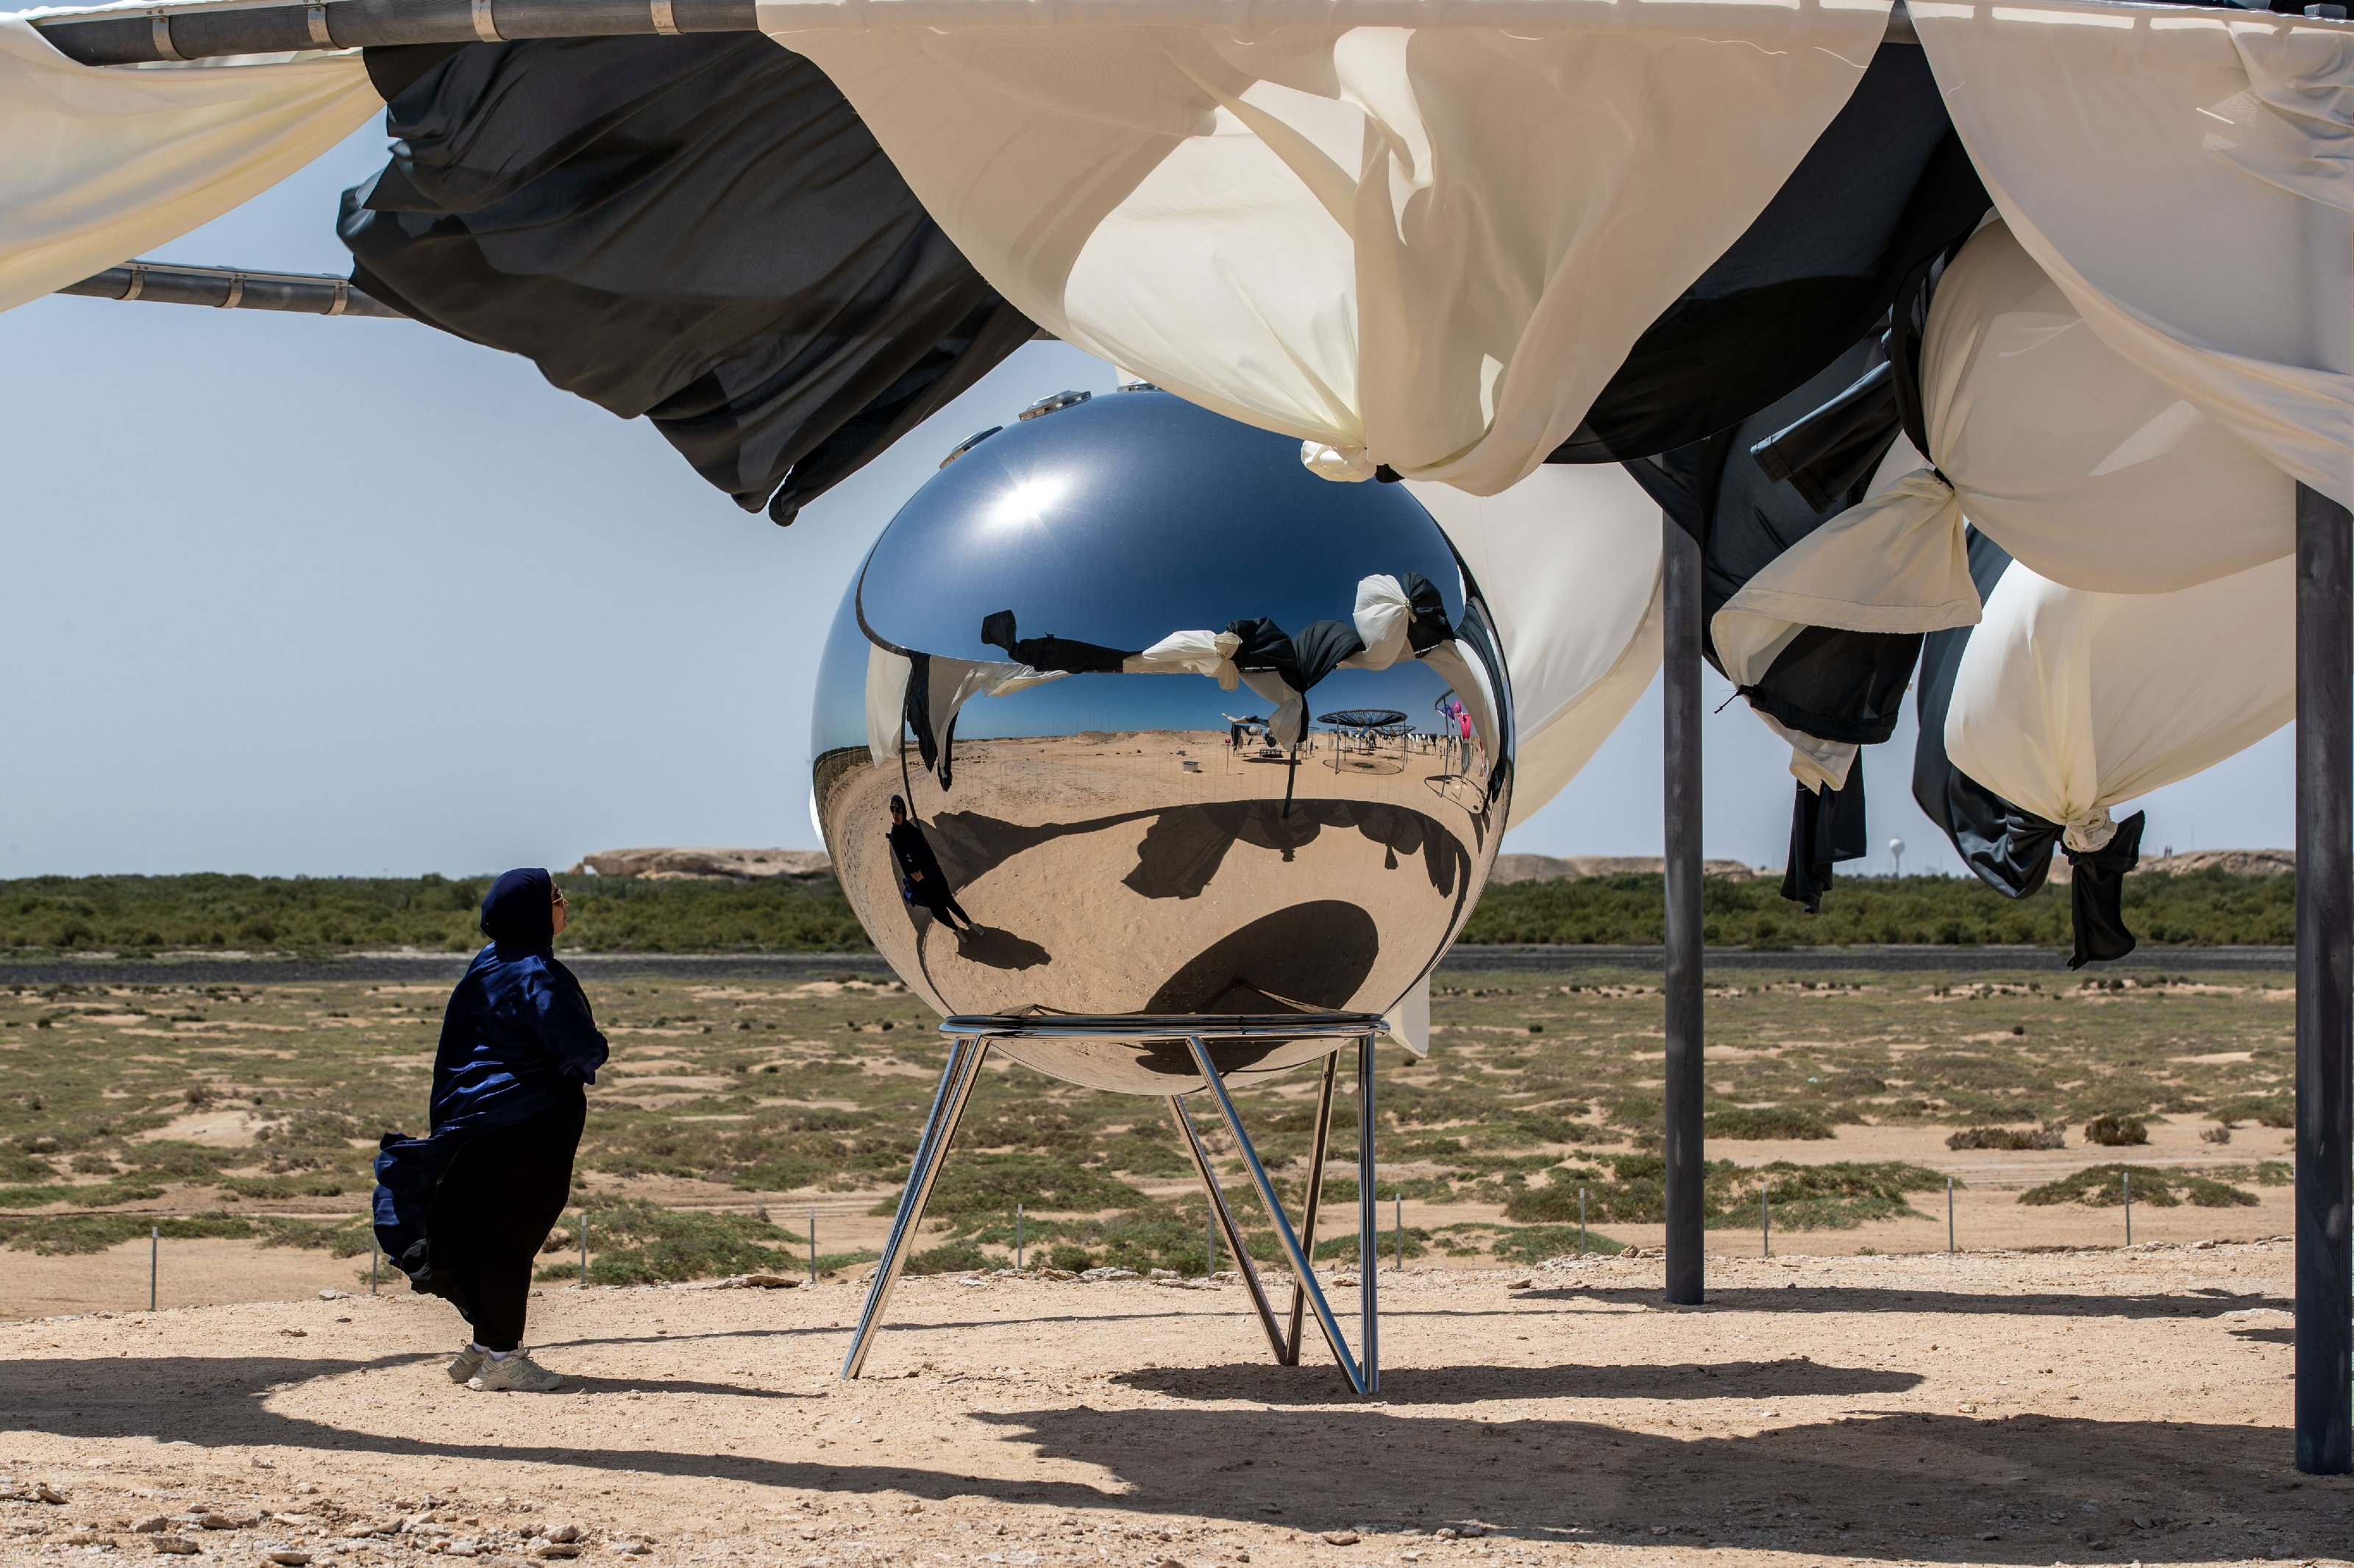 A woman in a black scarf staring at a metallic sphere set on metal legs in the middle of a desert.